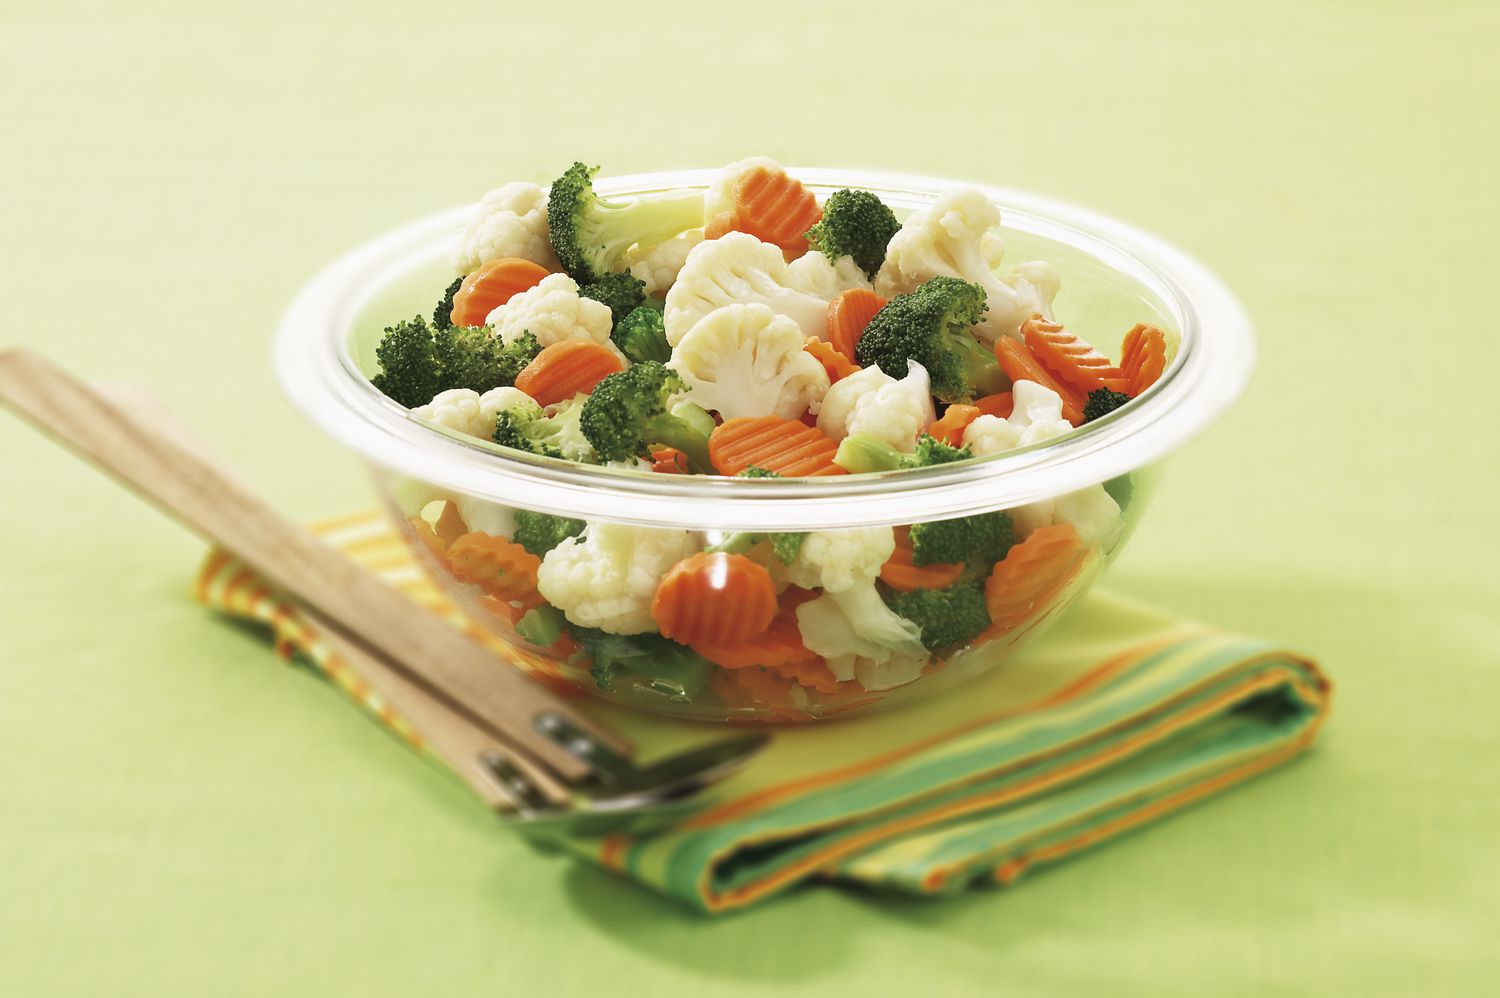 Cooked broccoli, carrots, and cauliflower in a bowl